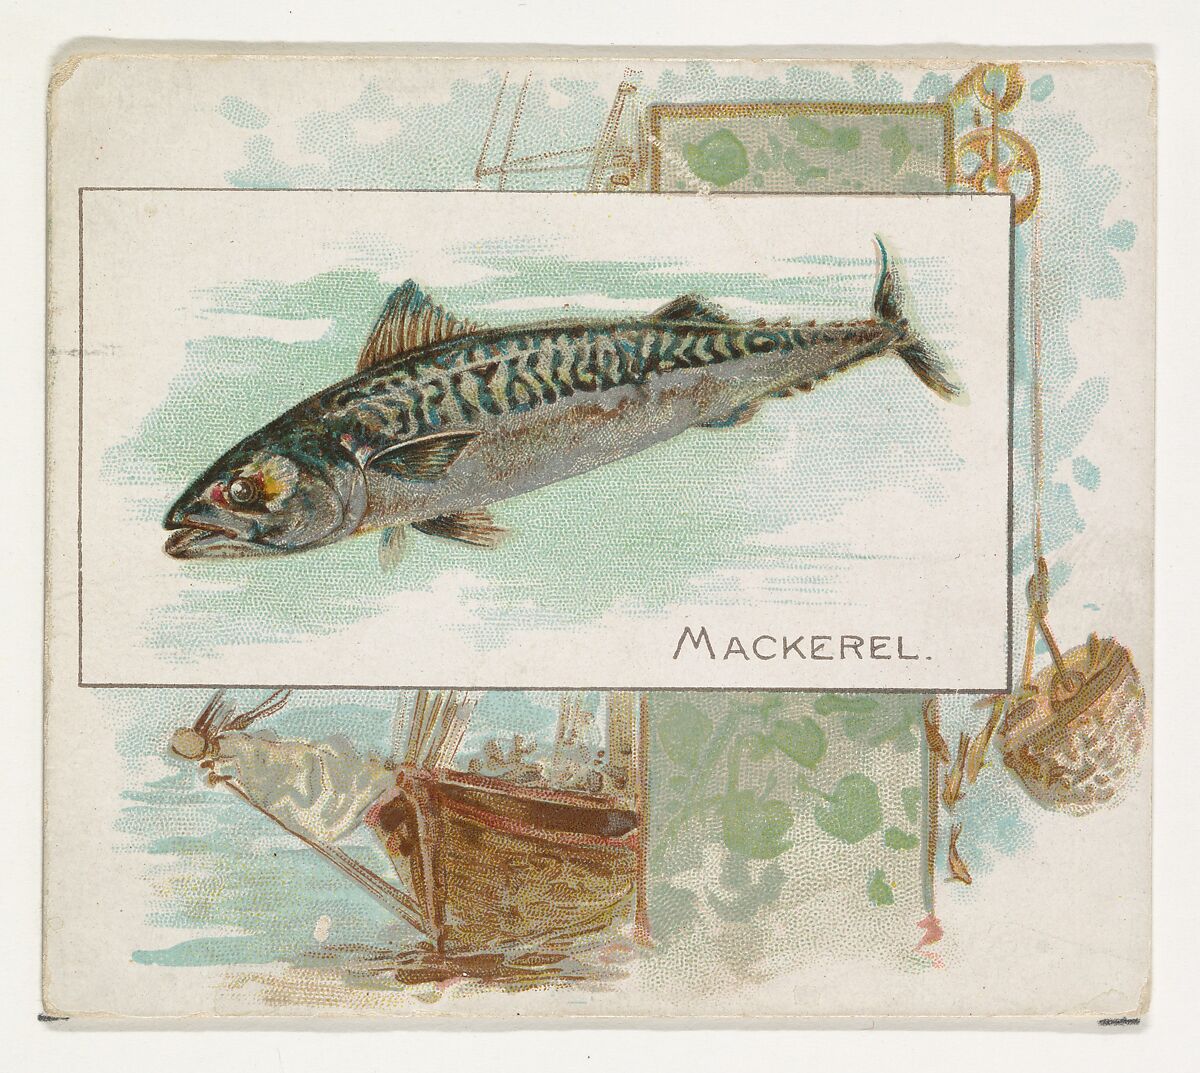 Mackerel, from Fish from American Waters series (N39) for Allen & Ginter Cigarettes, Issued by Allen &amp; Ginter (American, Richmond, Virginia), Commercial color lithograph 